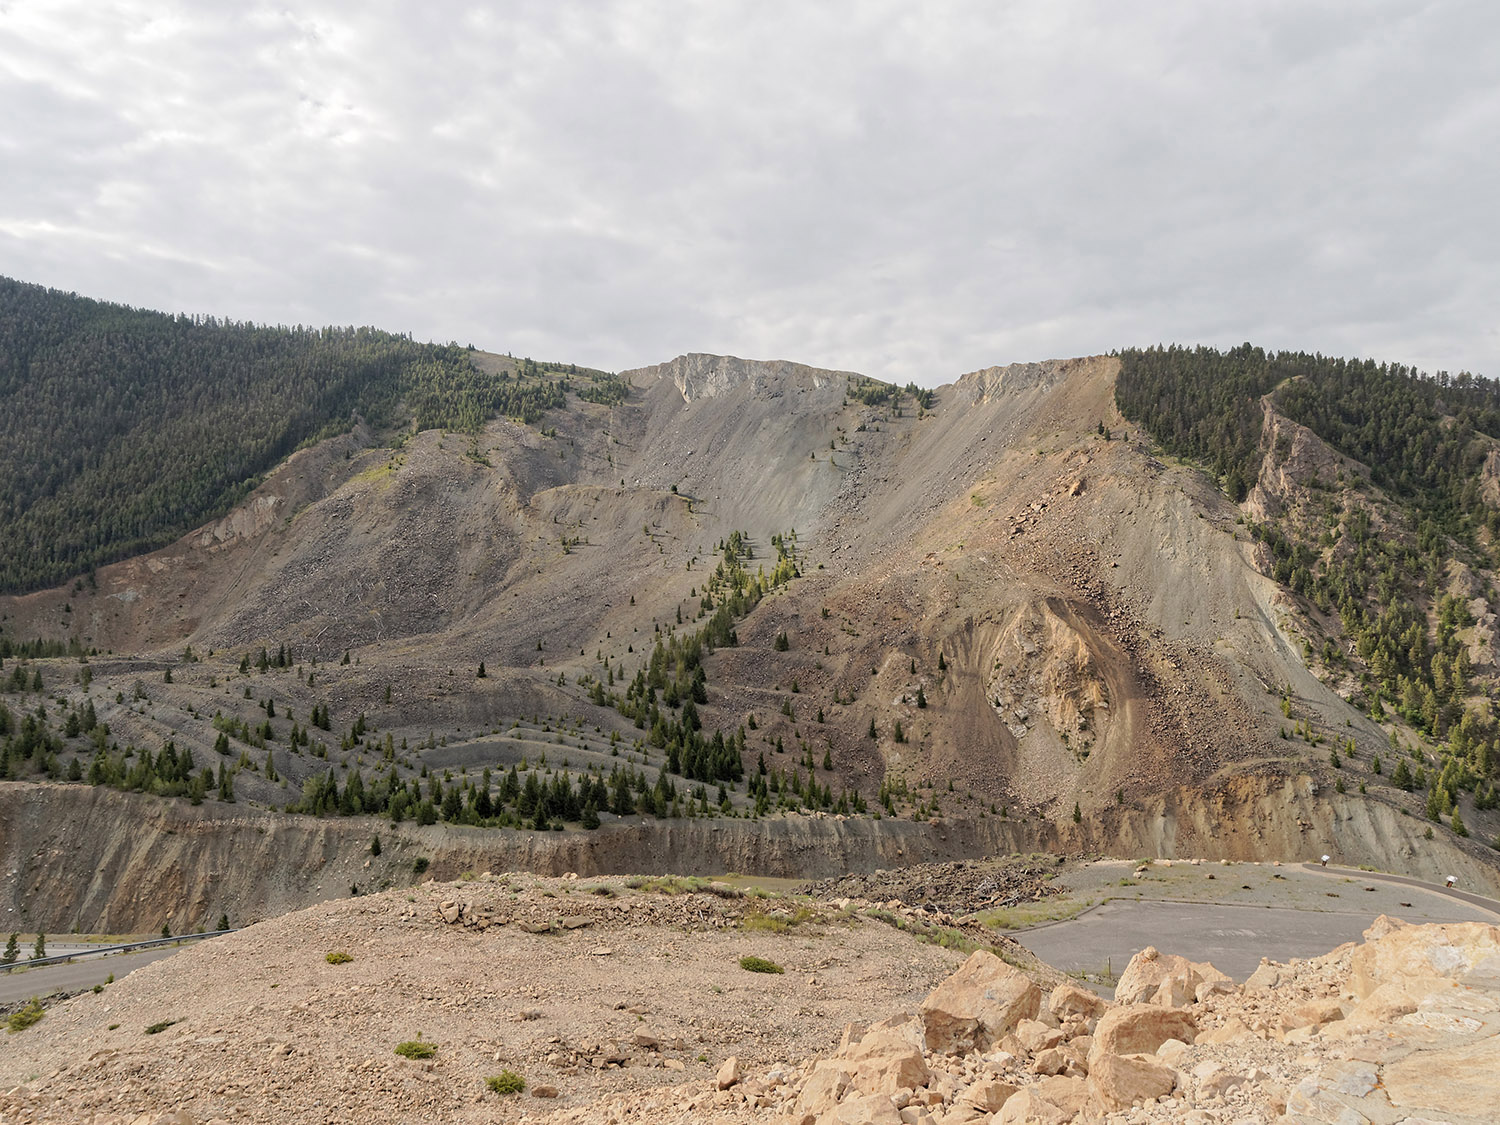 Debris field of Madison Slide area.  A 7.7 magnitude earthquake at 11:37 PM, August 17, 1959 caused the side of the mountain to detach and drop into the Madison River Valley killing campers on the valley floor and blocking the outflow of the Madison River.